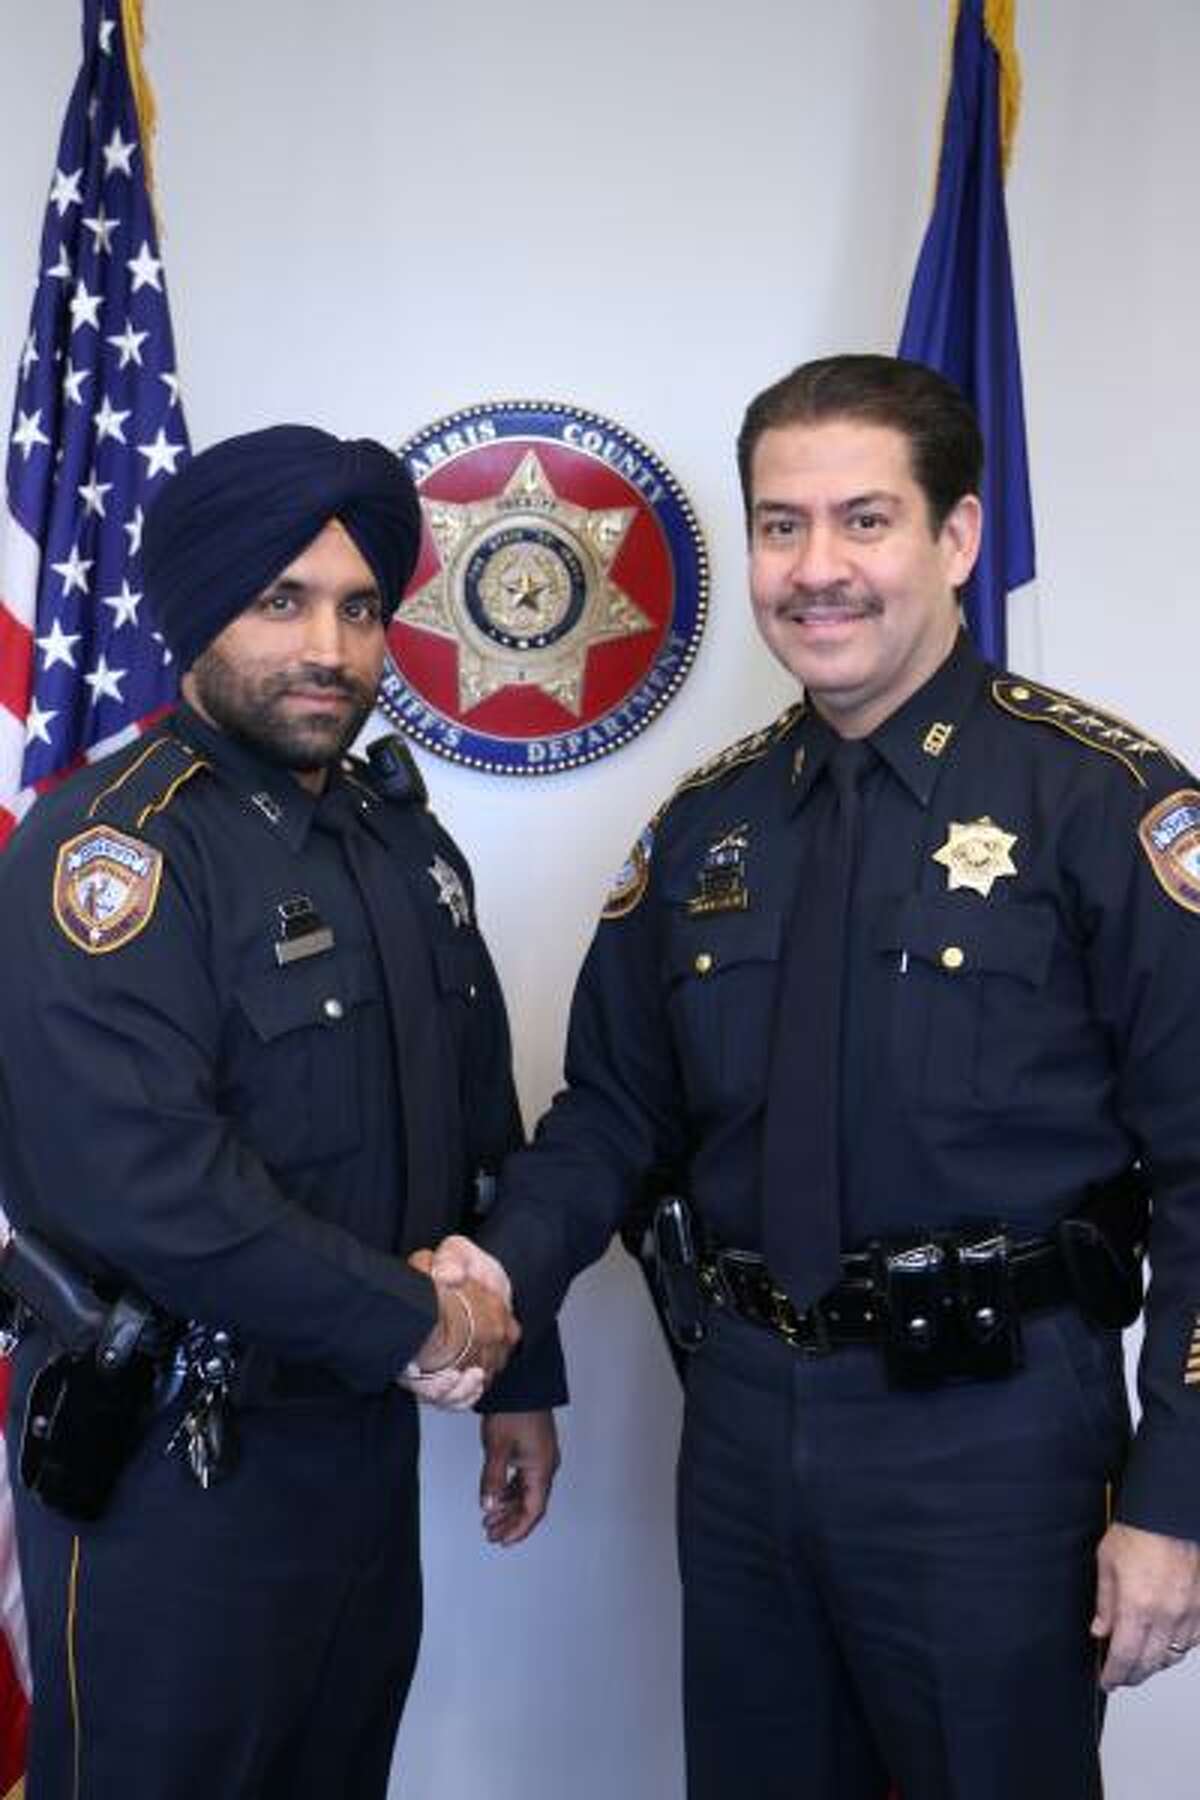 Harris County Sheriff's Deputy Sandeep Dhaliwal, left, and then-sheriff Adrian Garcia. Garcia, now the Harris County commissioner for Precinct 2, wants to name the Harris County Criminal Justice Center after Dhaliwal.